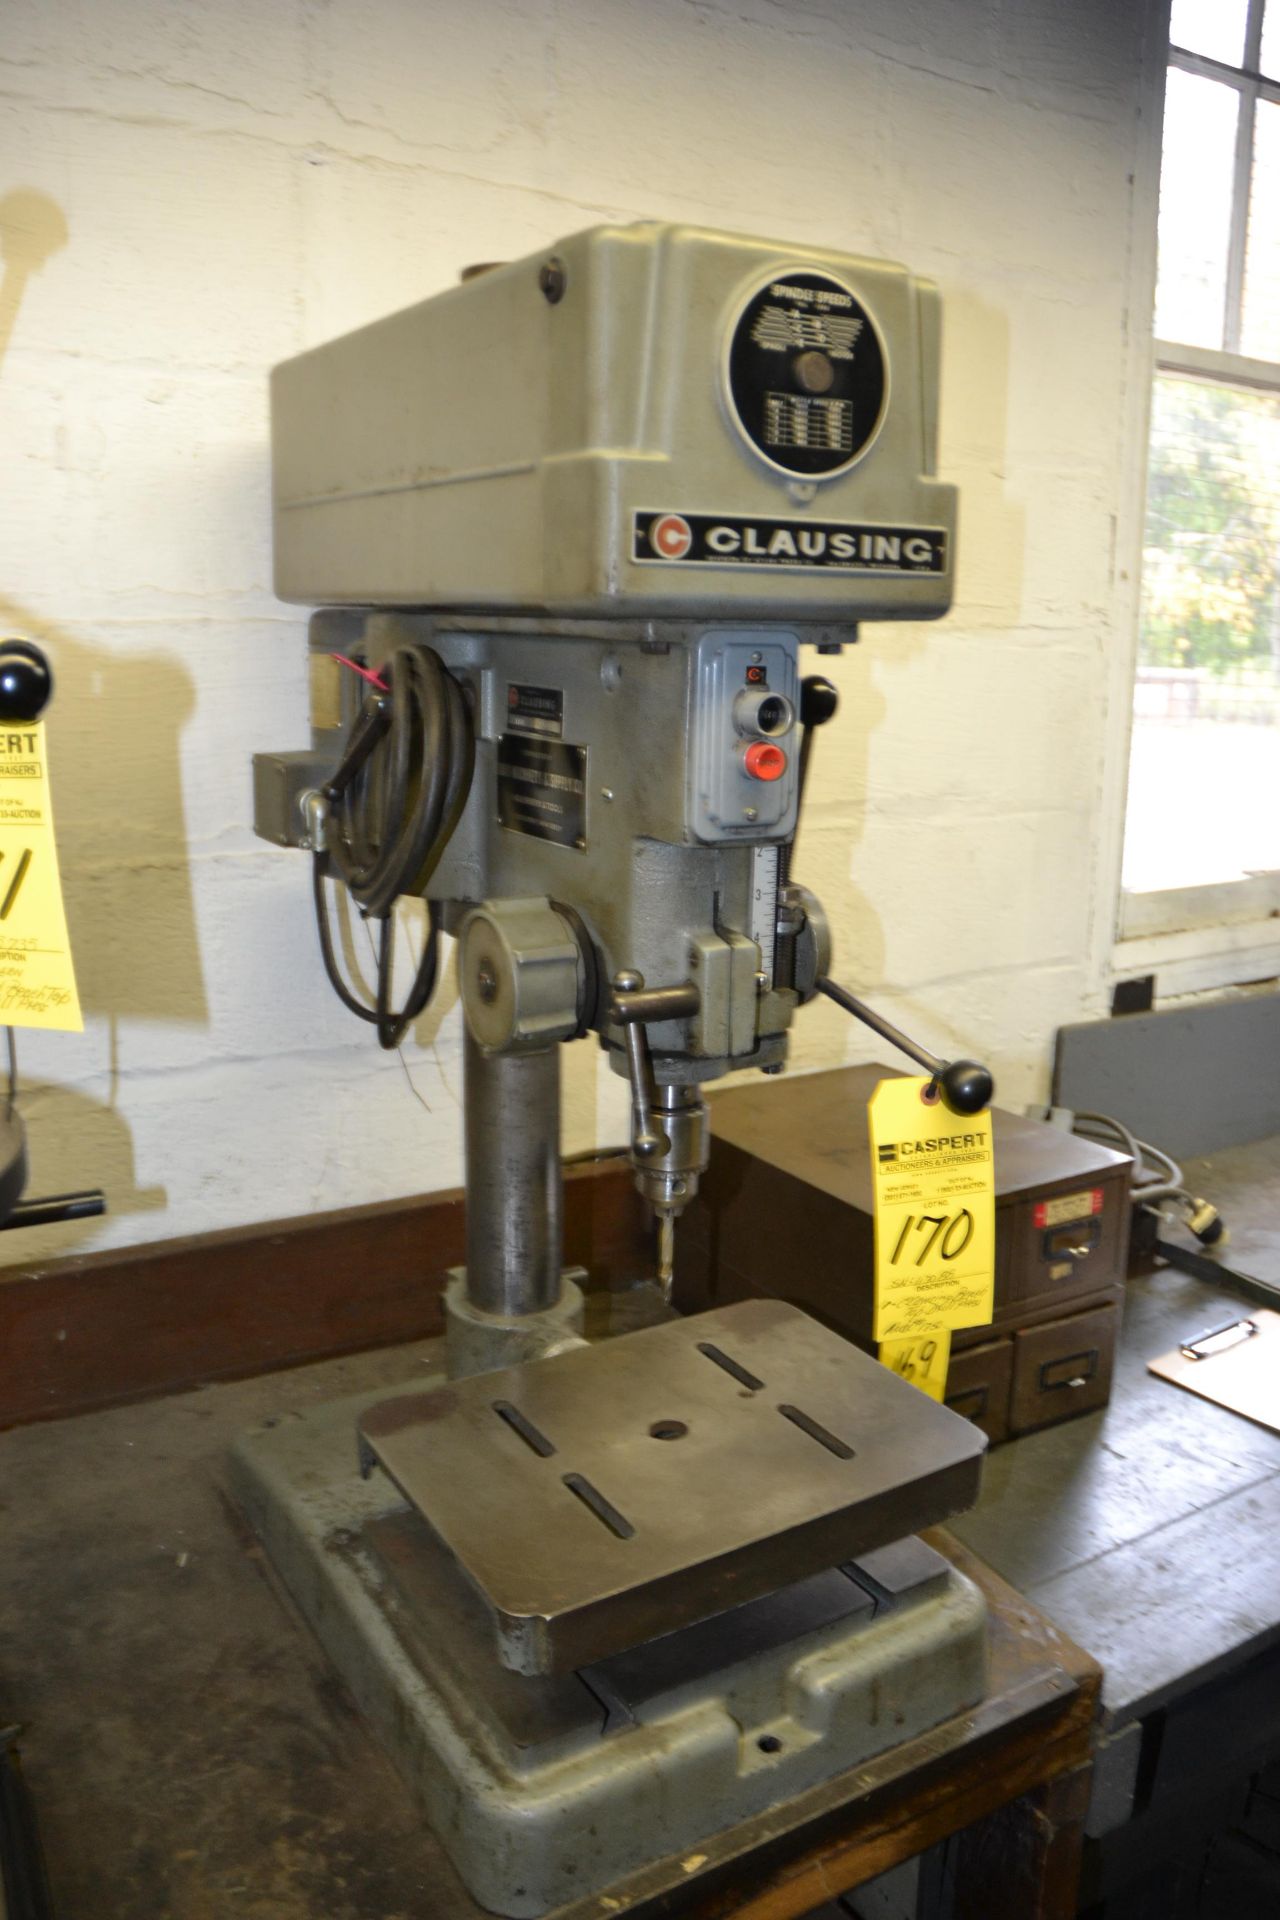 Clausing Bench Top Drill Press, M: 1750 - Image 2 of 2